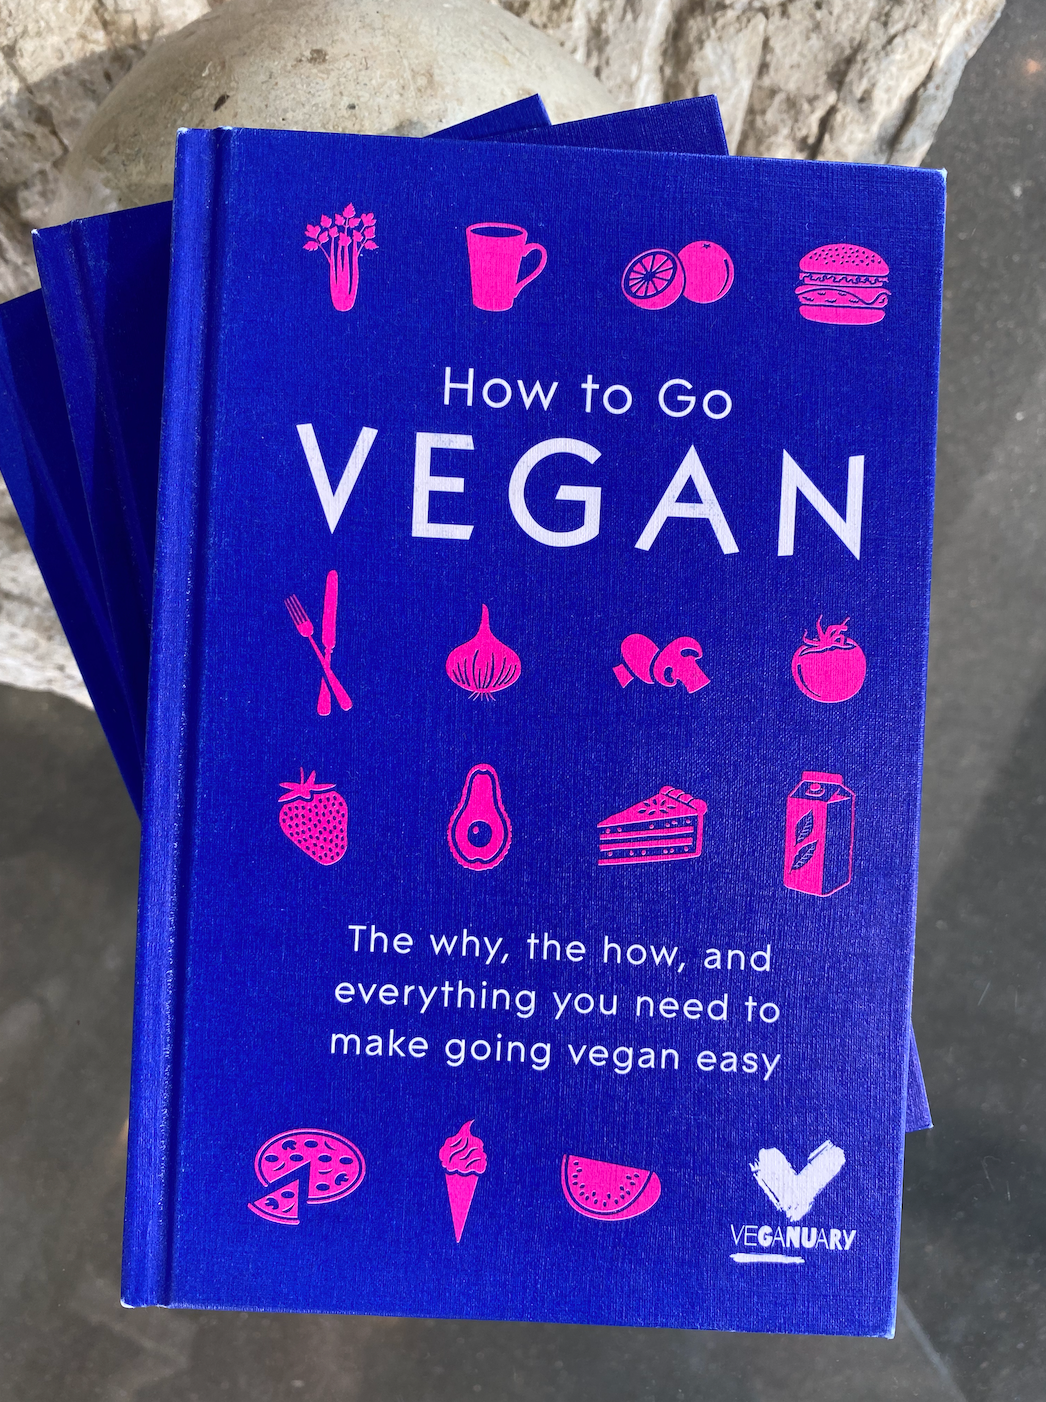 How to Go Vegan: The Why, the How, and Everything You Need